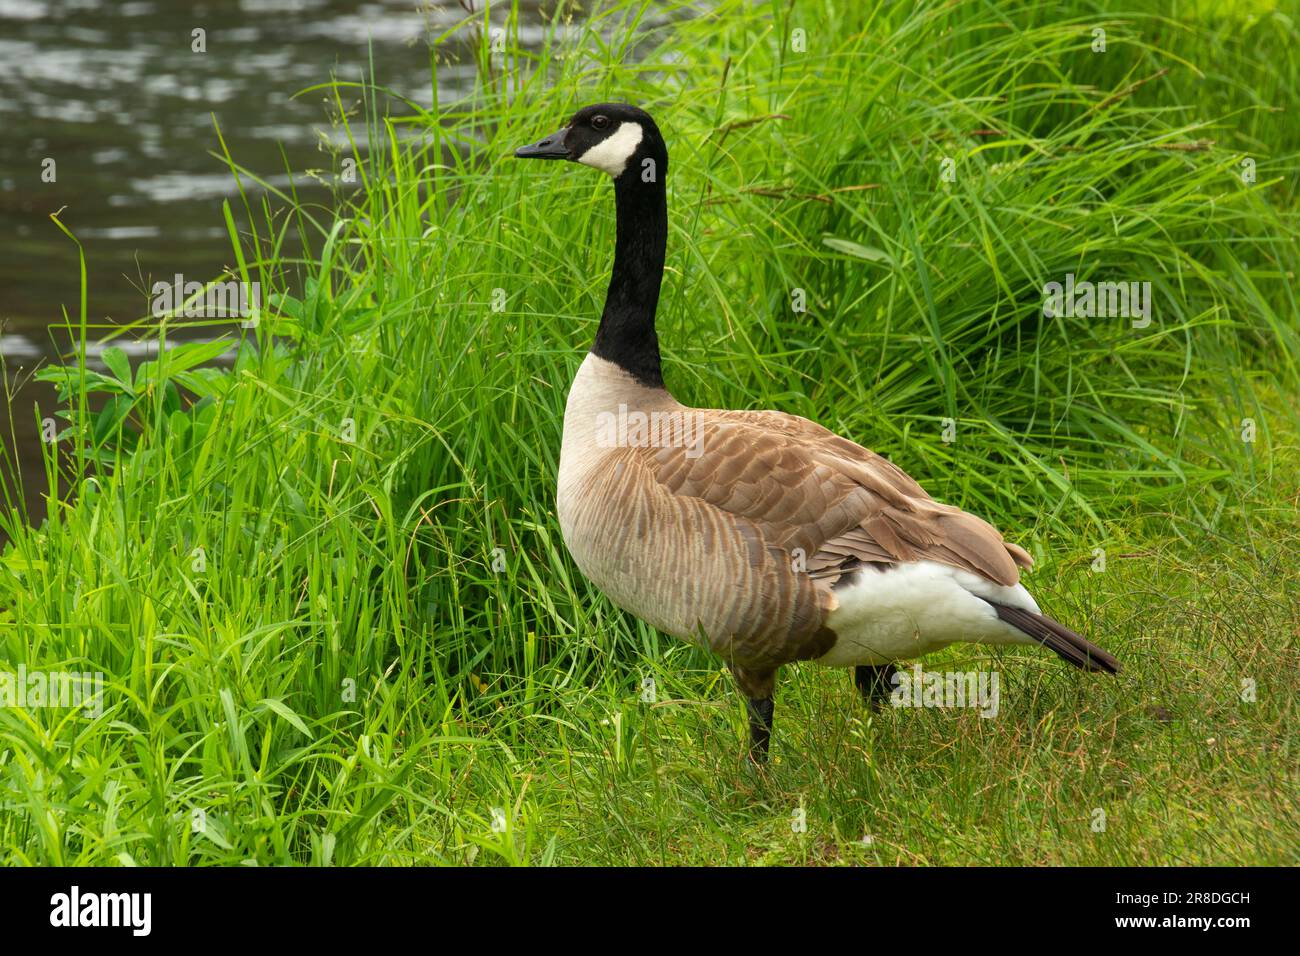 Canada goose (Branta canadensis) from the Metolius River Trail, Metolius Wild and Scenic River, Deschutes National Forest, Oregon Stock Photo